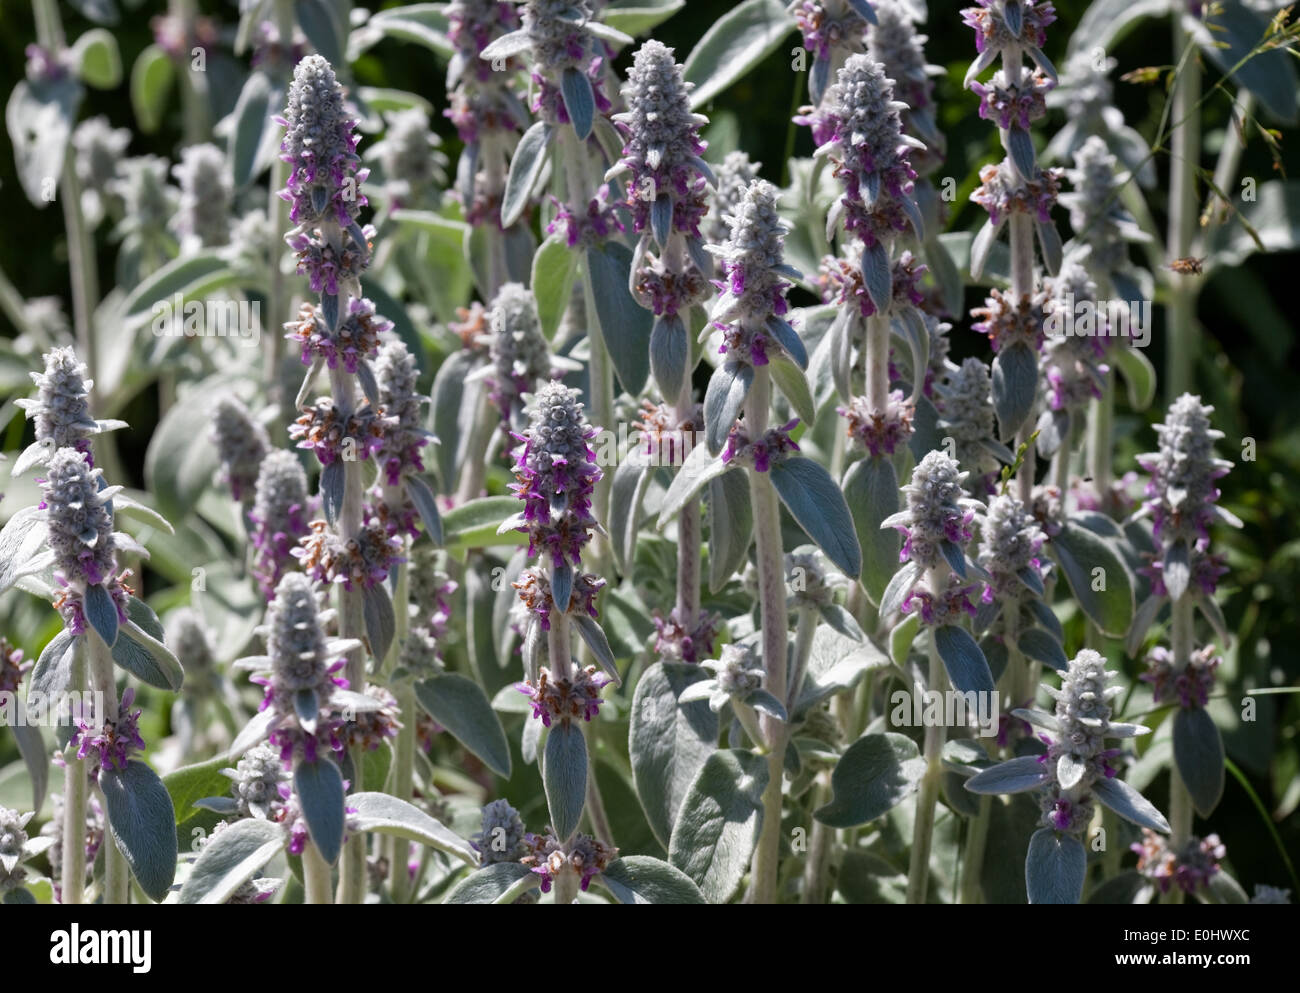 Woll-Ziest, tappeto color argento, (Stachys byzantina), DIE GARTEN TULLN 2009 - Stachys, tappeto color argento, (Stachys byzantina) Foto Stock